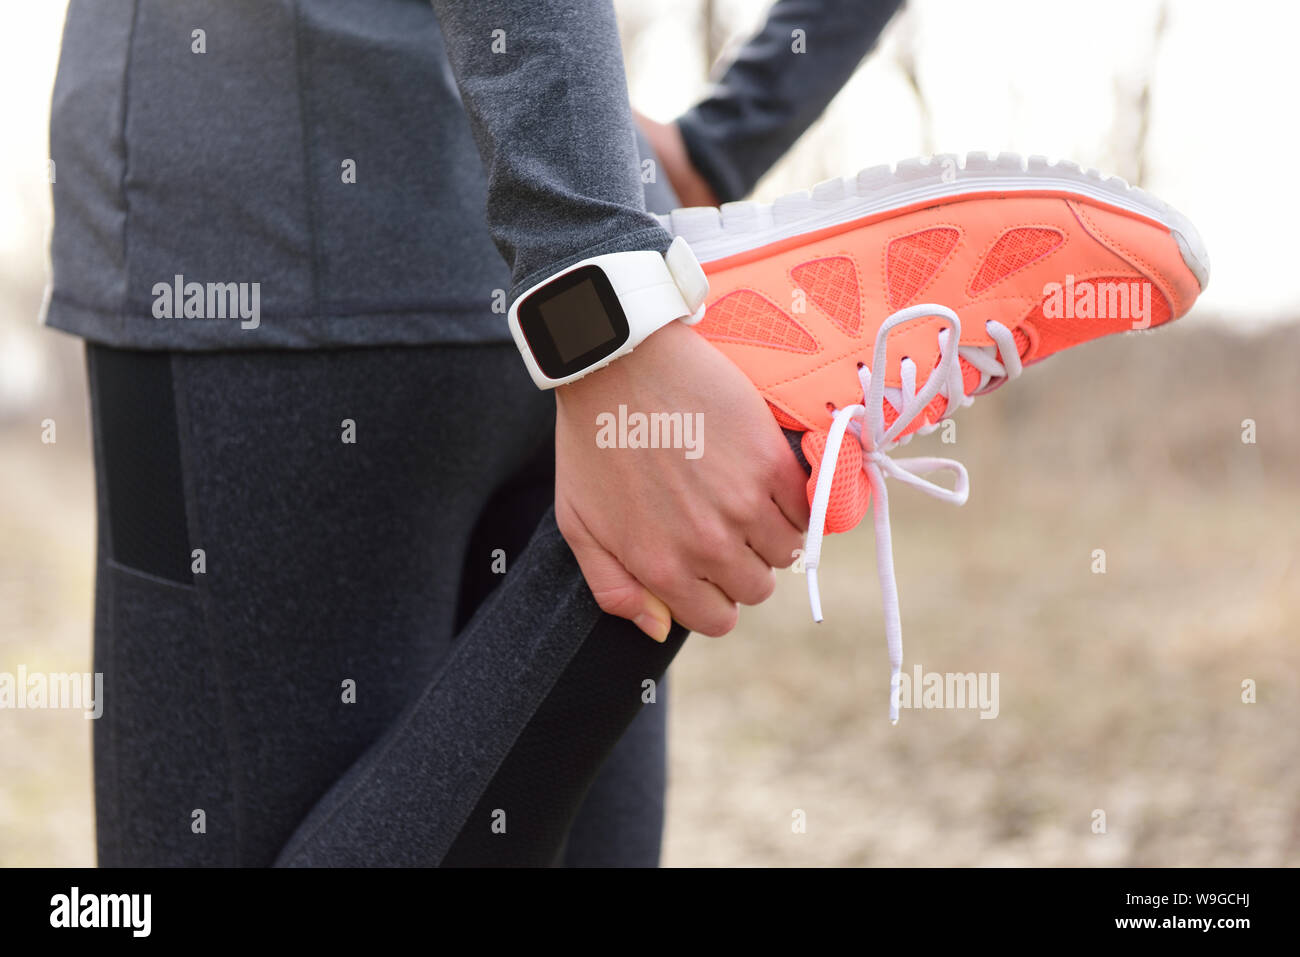 Running stretching - runner wearing smartwatch. Closeup of running shoes, woman stretching leg as warm-up before run with sport activity tracker watch at wrist to monitor the heart rate during cardio. Stock Photo